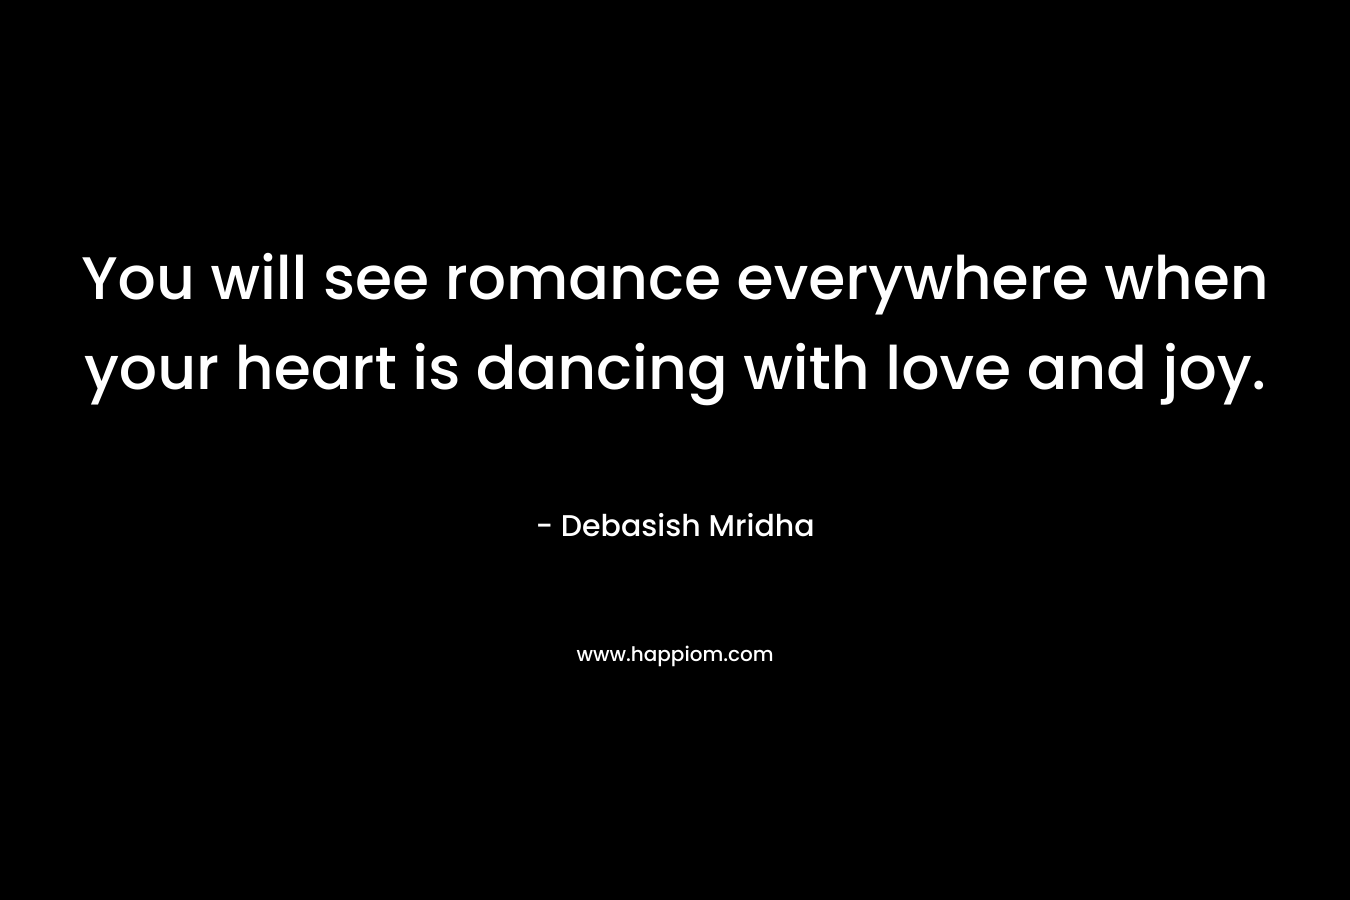 You will see romance everywhere when your heart is dancing with love and joy.